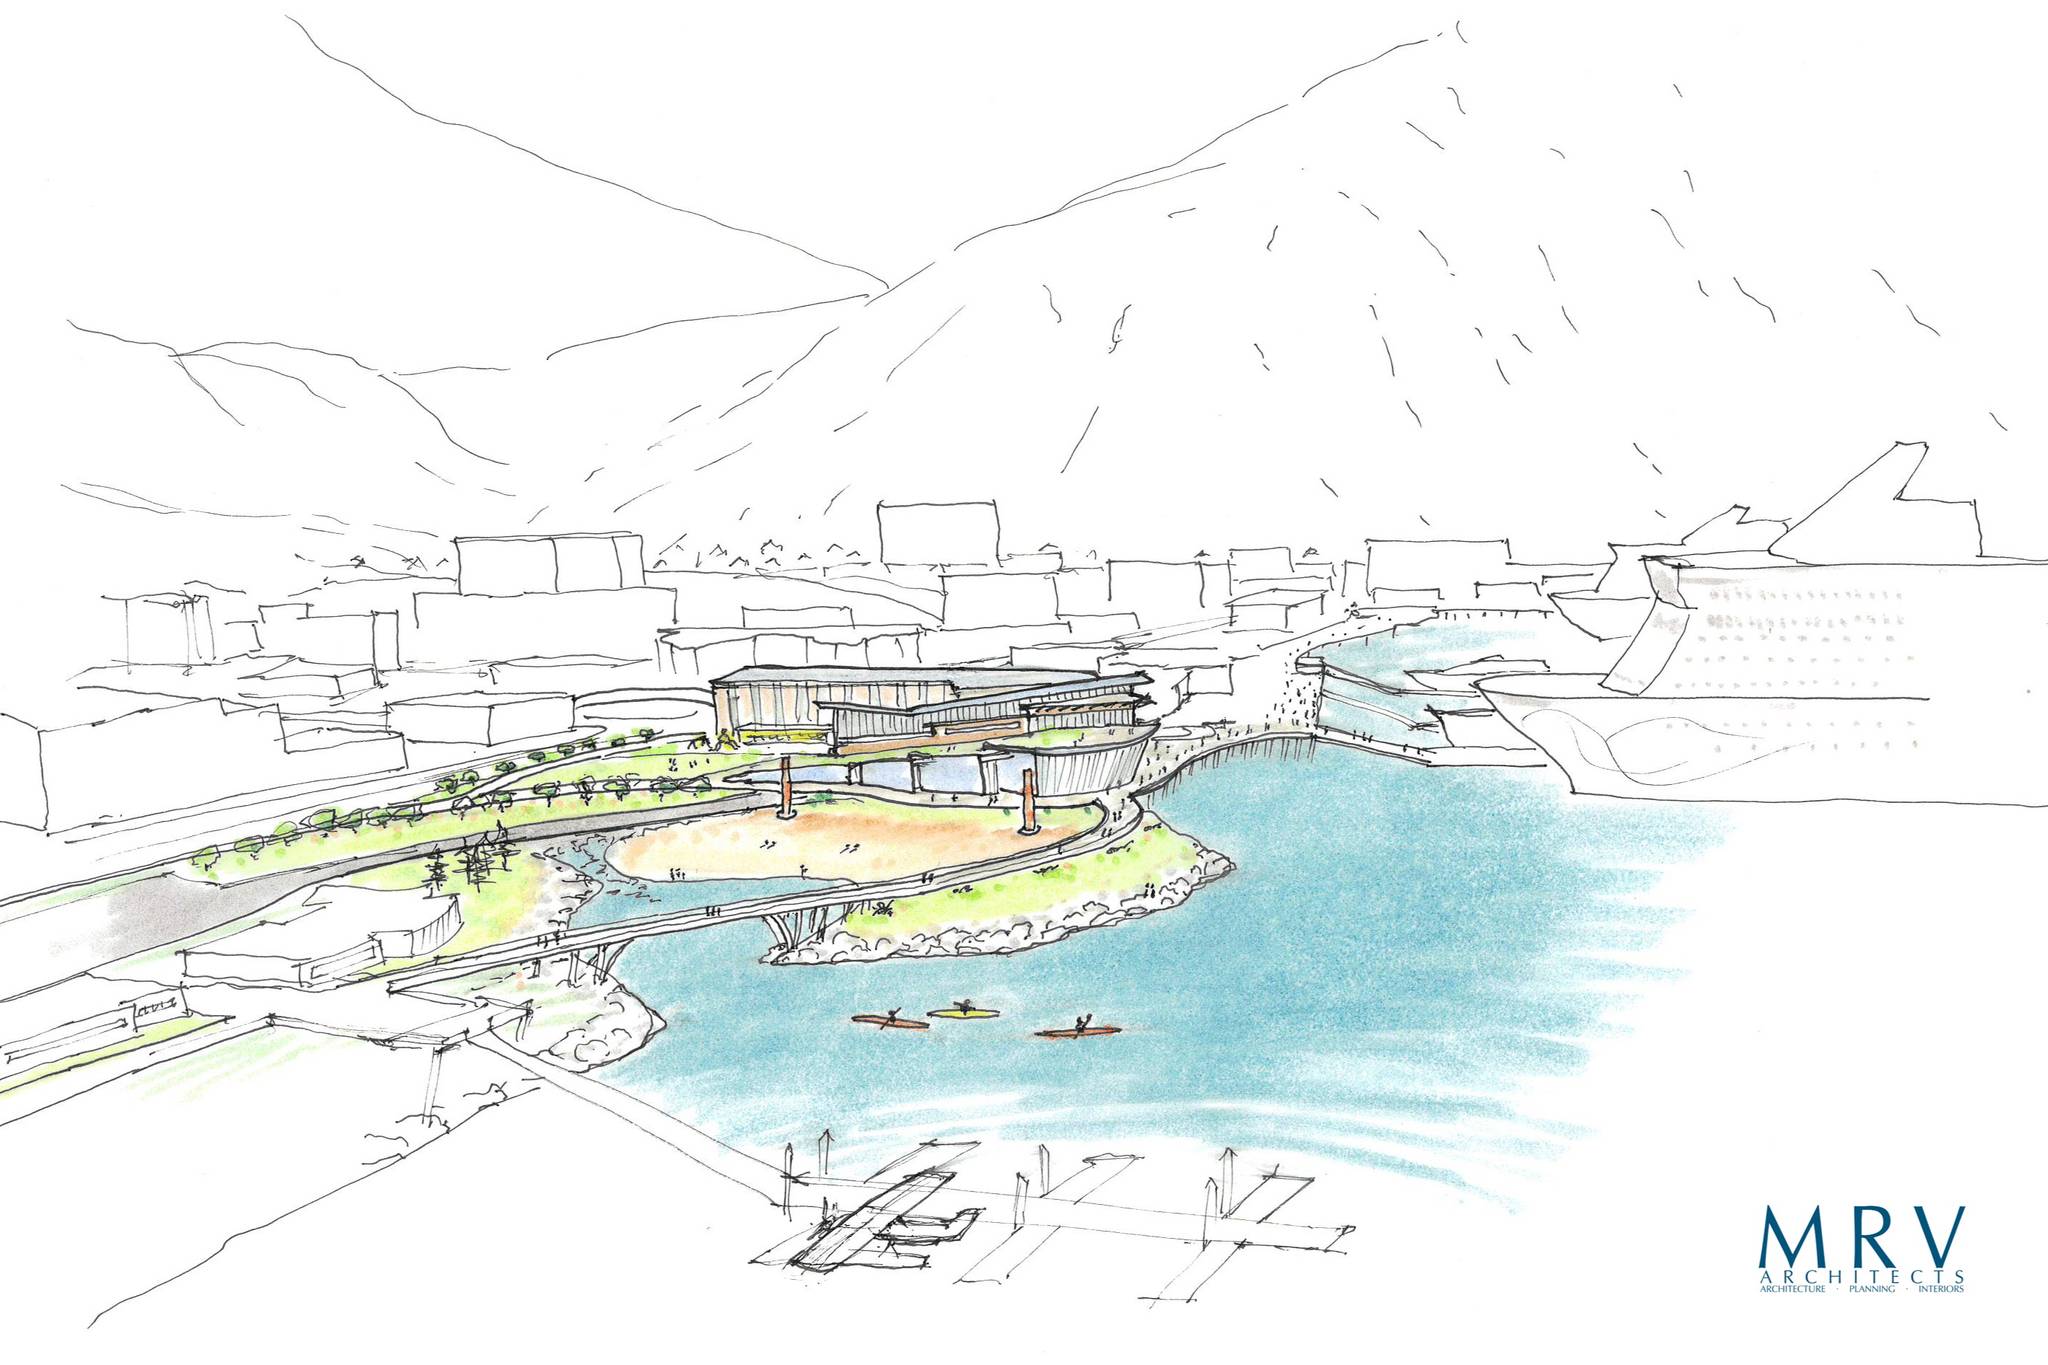 A conceptual drawing showing a possible use for Norwegian Cruise Line’s property on Egan Drive. This drawing shows the dock within the larger plan for a continuous seawalk, and incorporates properties owned by the City and Borough of Juneau in the design. (Courtesy image / MRV Architects)